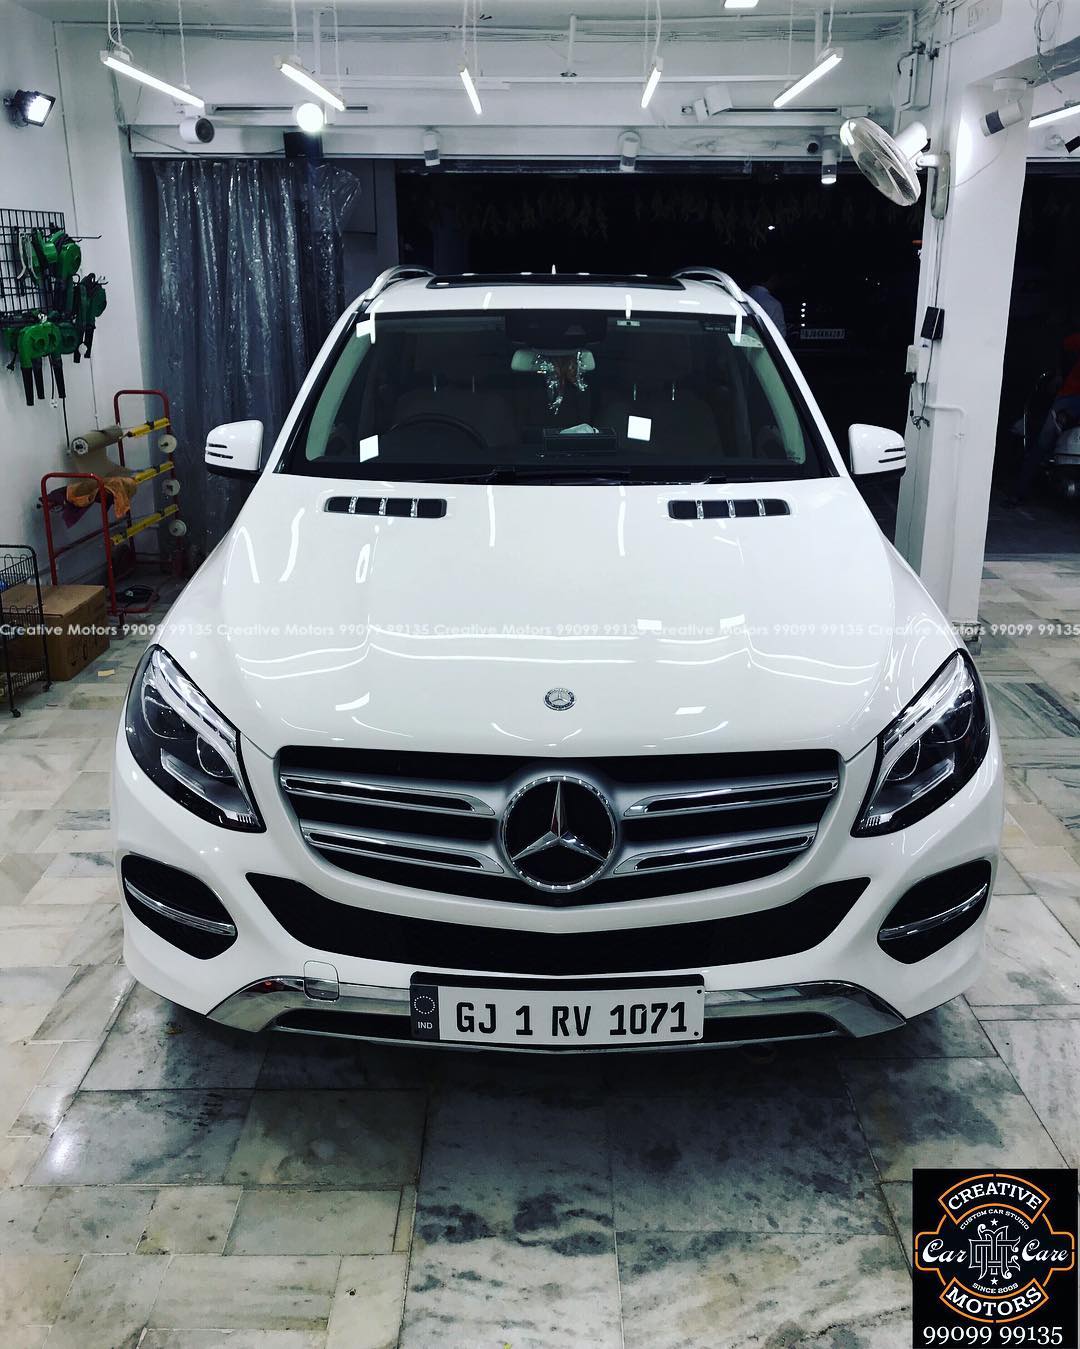 .
#Mercedes #GLE350d  got the #Best #Ceramic Treatment at ‘’#Creative #Motors’’ .
#Ceramic Coat #Benefits: .
♦Gives Additional Gloss/Shine ♦Protects Paint from Fading ♦No Ageing Effect ♦Removes Hairline Scratches & Water-spots ♦Water & Dust Repellent ♦Easy to Clean & Maintain ♦No need to Wax and Polish again ♦Scratch Resistant upto 9H Hardness ♦3 Year  Protection in 3 hours .
Call or Whatsapp : +91 99099 99135 .
Follow us on instagram: www.instagram.com/creativemotors .
Add: .
Creative Motors Ahmedabad 
GF 1,2 Urvashi Complex,  Nr. Calcutta Motors, Mithakhali Six Roads, Law Garden Road, Navrangpura, Ahmedabad 
9909999135 .
#creativemotors #bikes #bikers #Cars #carspa #microdetailing #ceramiccoatings #coatings  #glasscoatings #waterrepellant #scratchproof #minicooper #supercars #Rajkot #ahmedabad #Mercedes #Gle #qualityovereverything